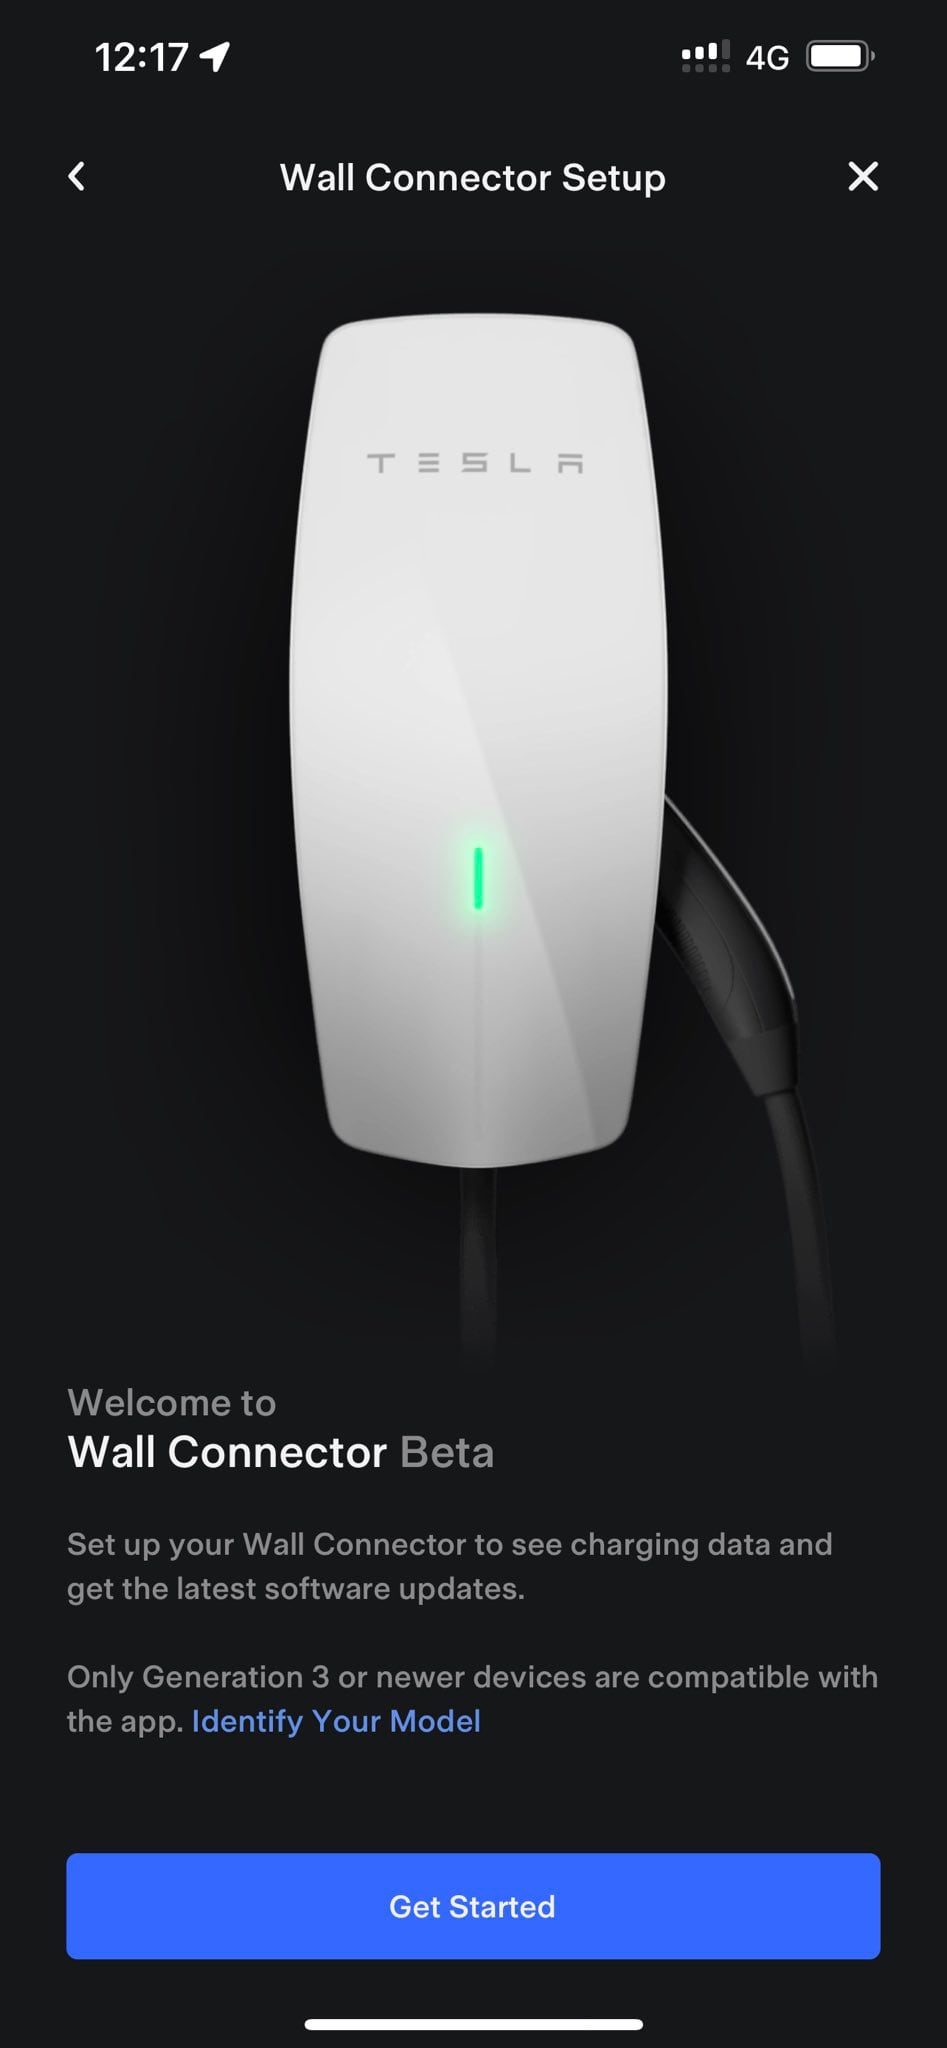 Connect to Wall Connector